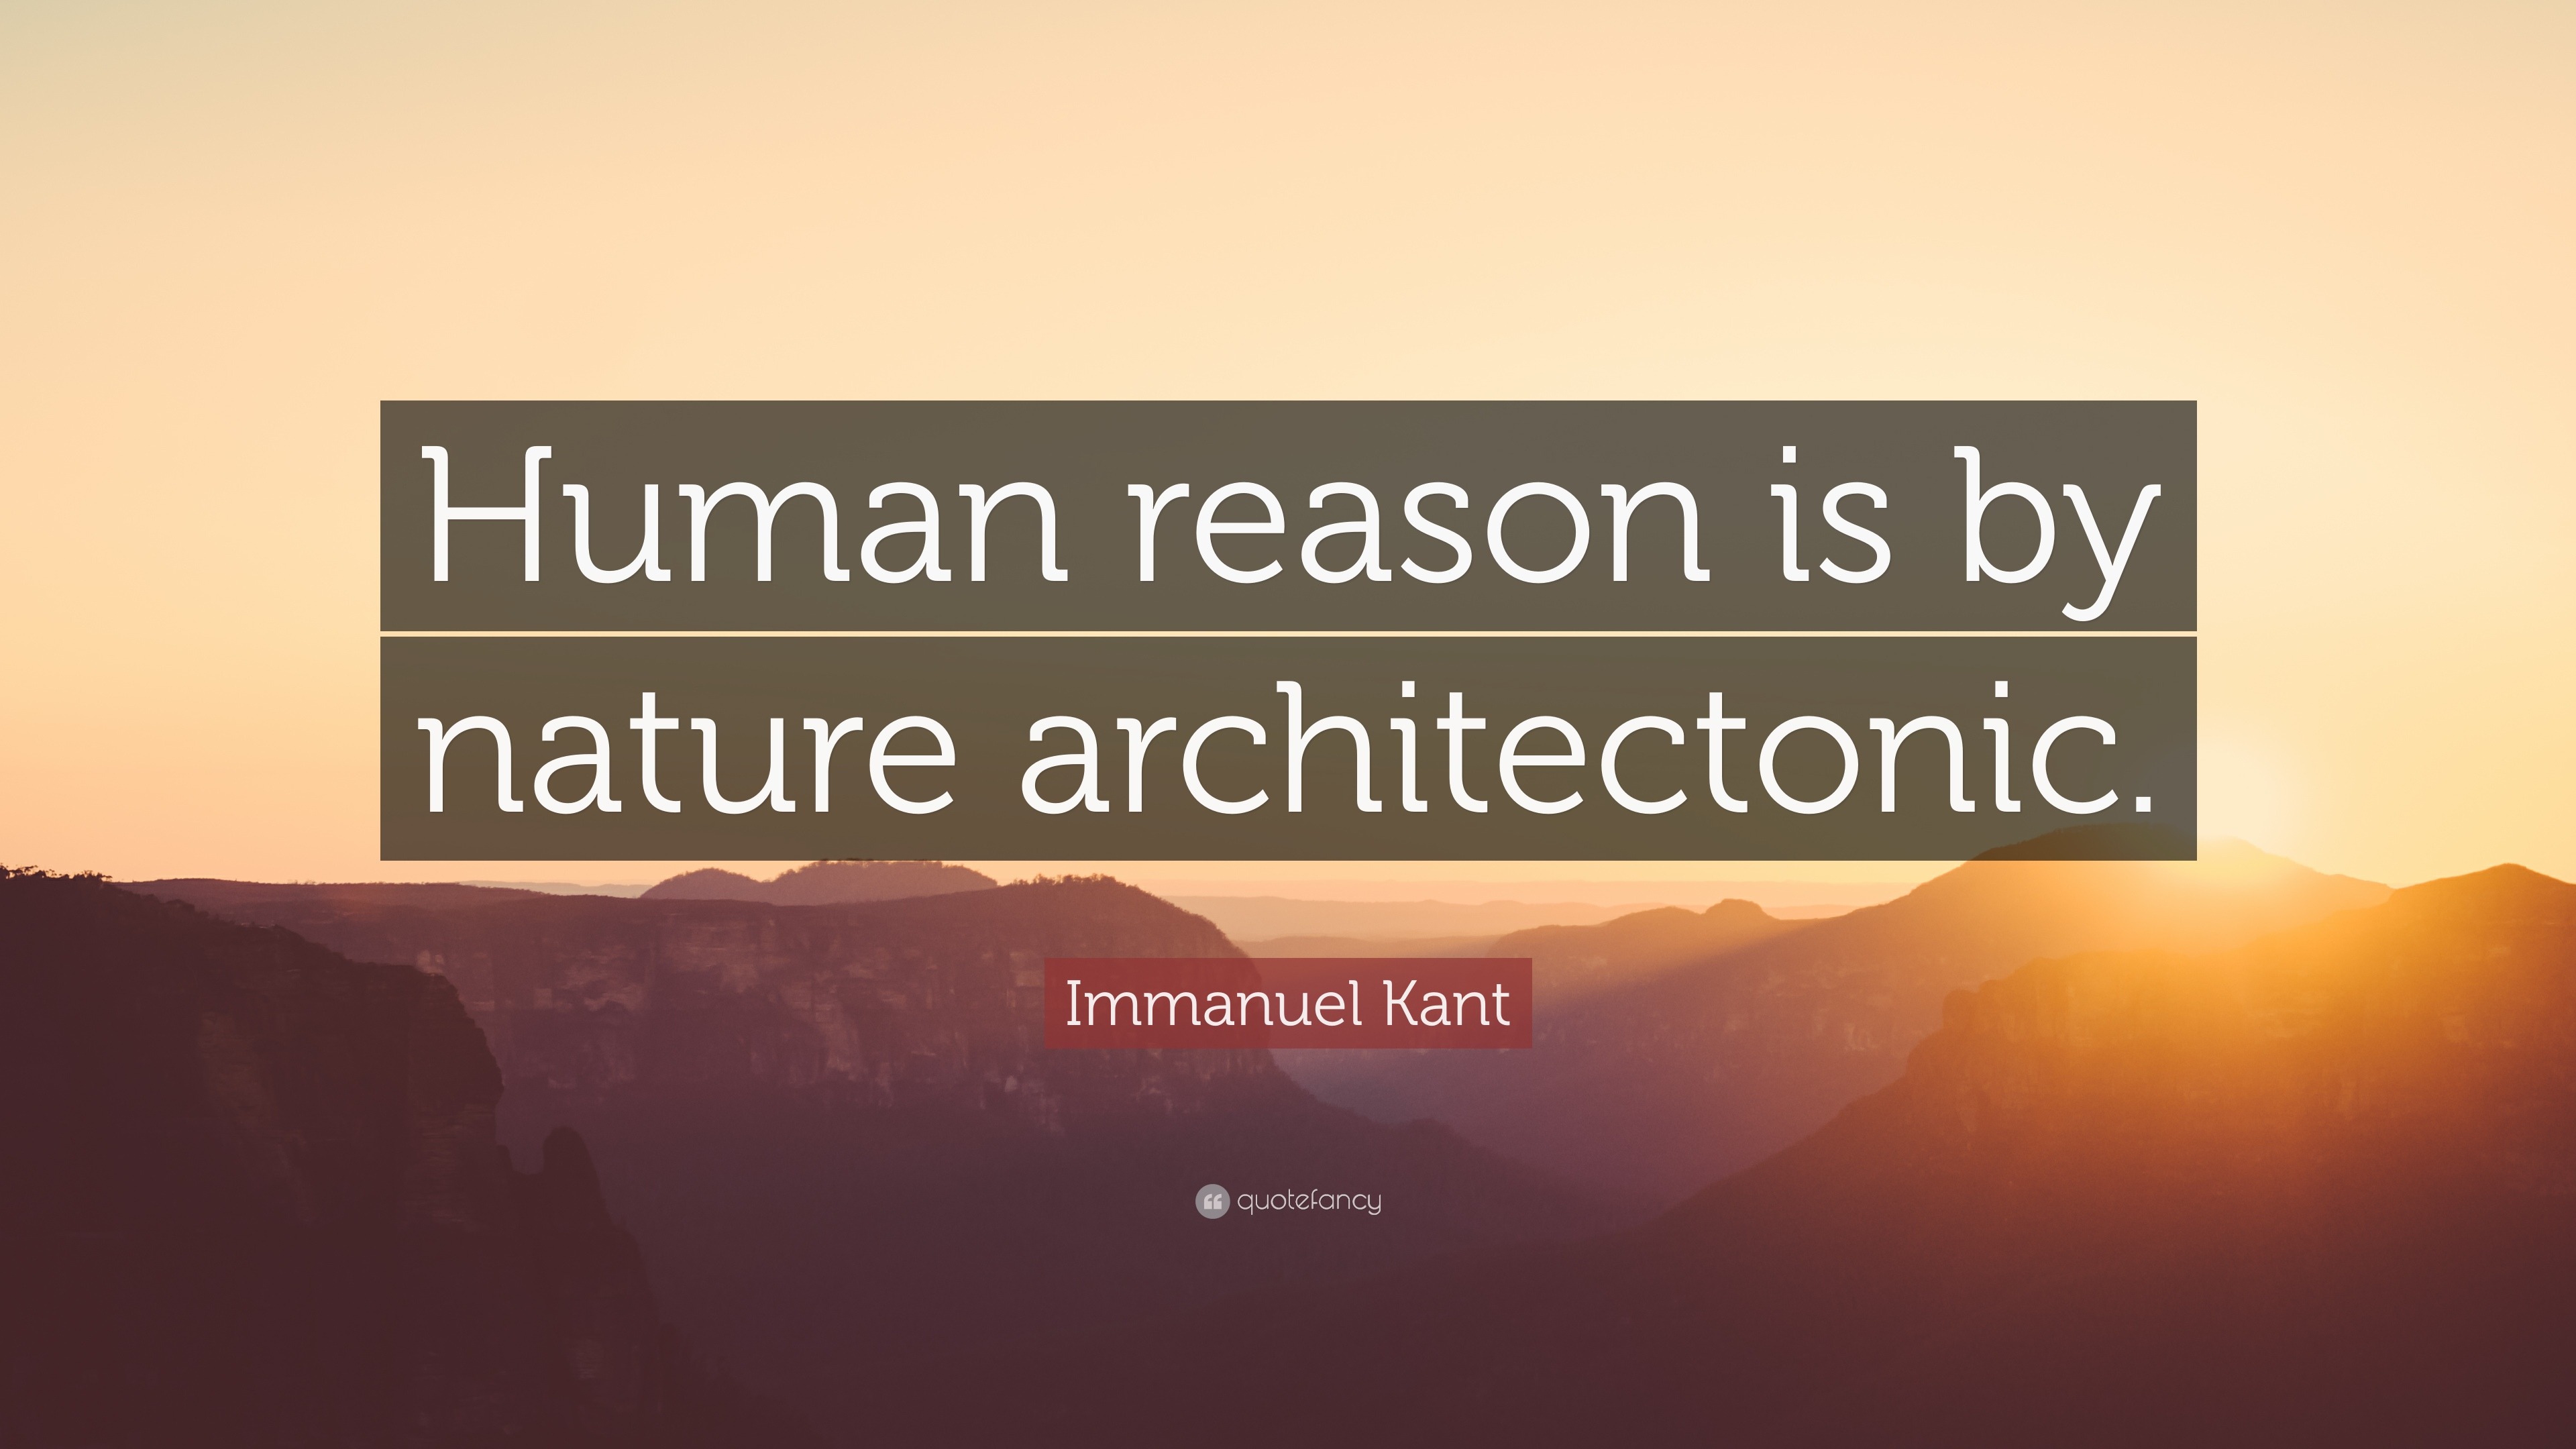 Immanuel Kant Quote: “Human reason is by architectonic.”